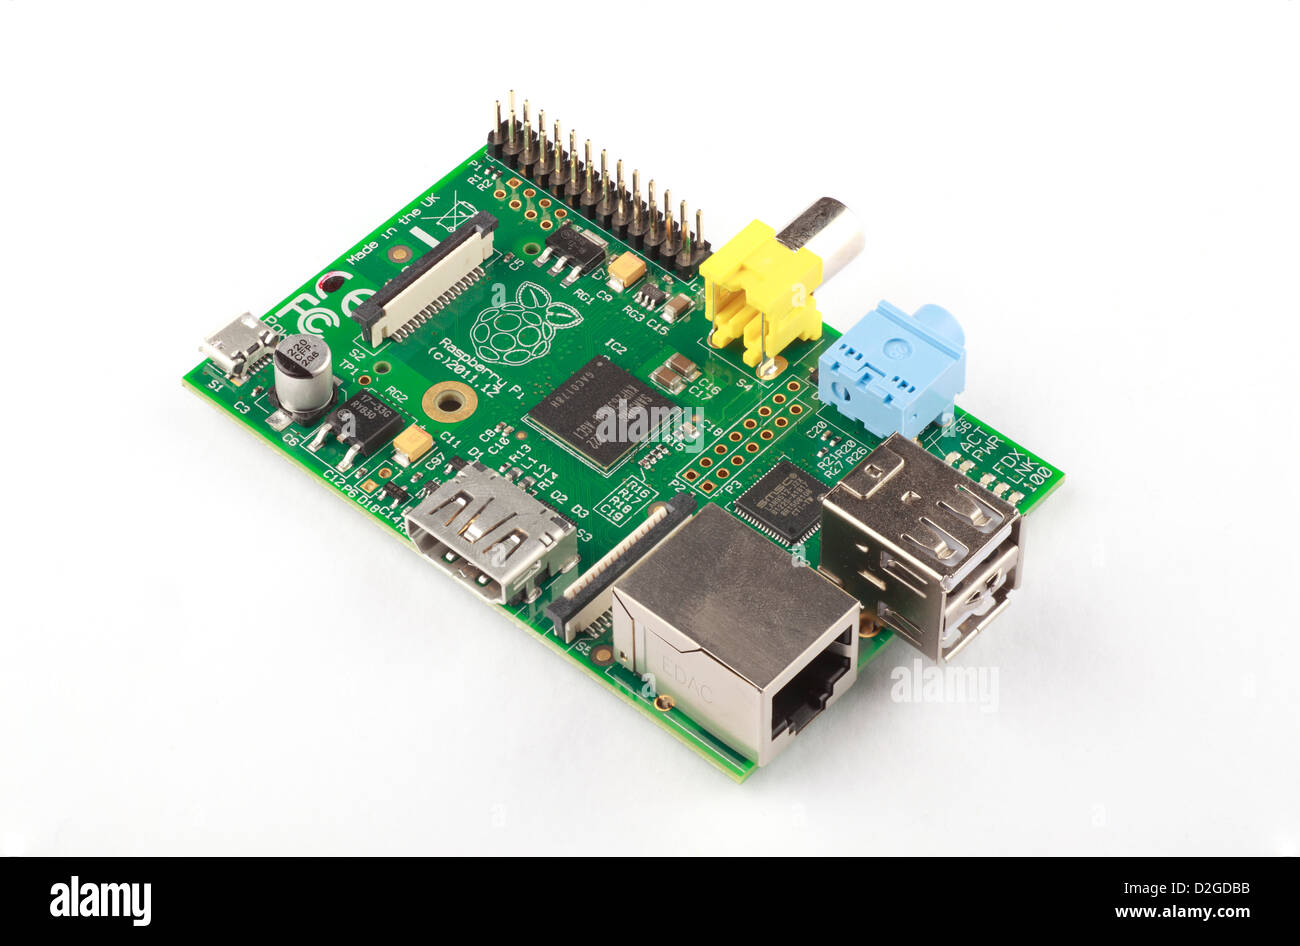 Raspberry pi - small low cost arm computer aimed at hobbyists and schools. Isolated on white background. Stock Photo